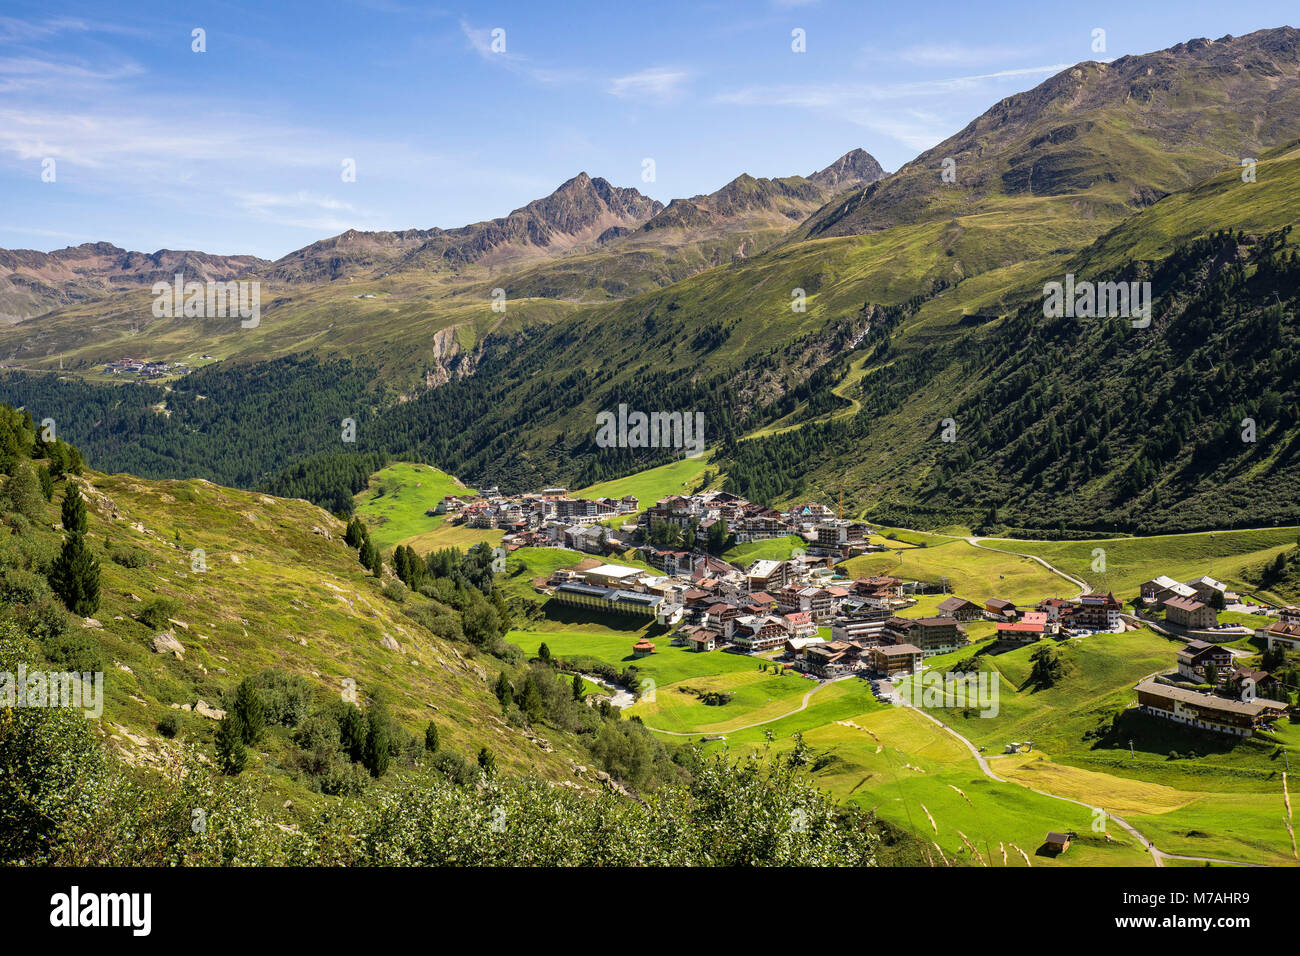 Austria, Tyrol, Ötztal, Obergurgl, view to Obergurgl in the Ötztal and the Stubai Alps in the background Stock Photo